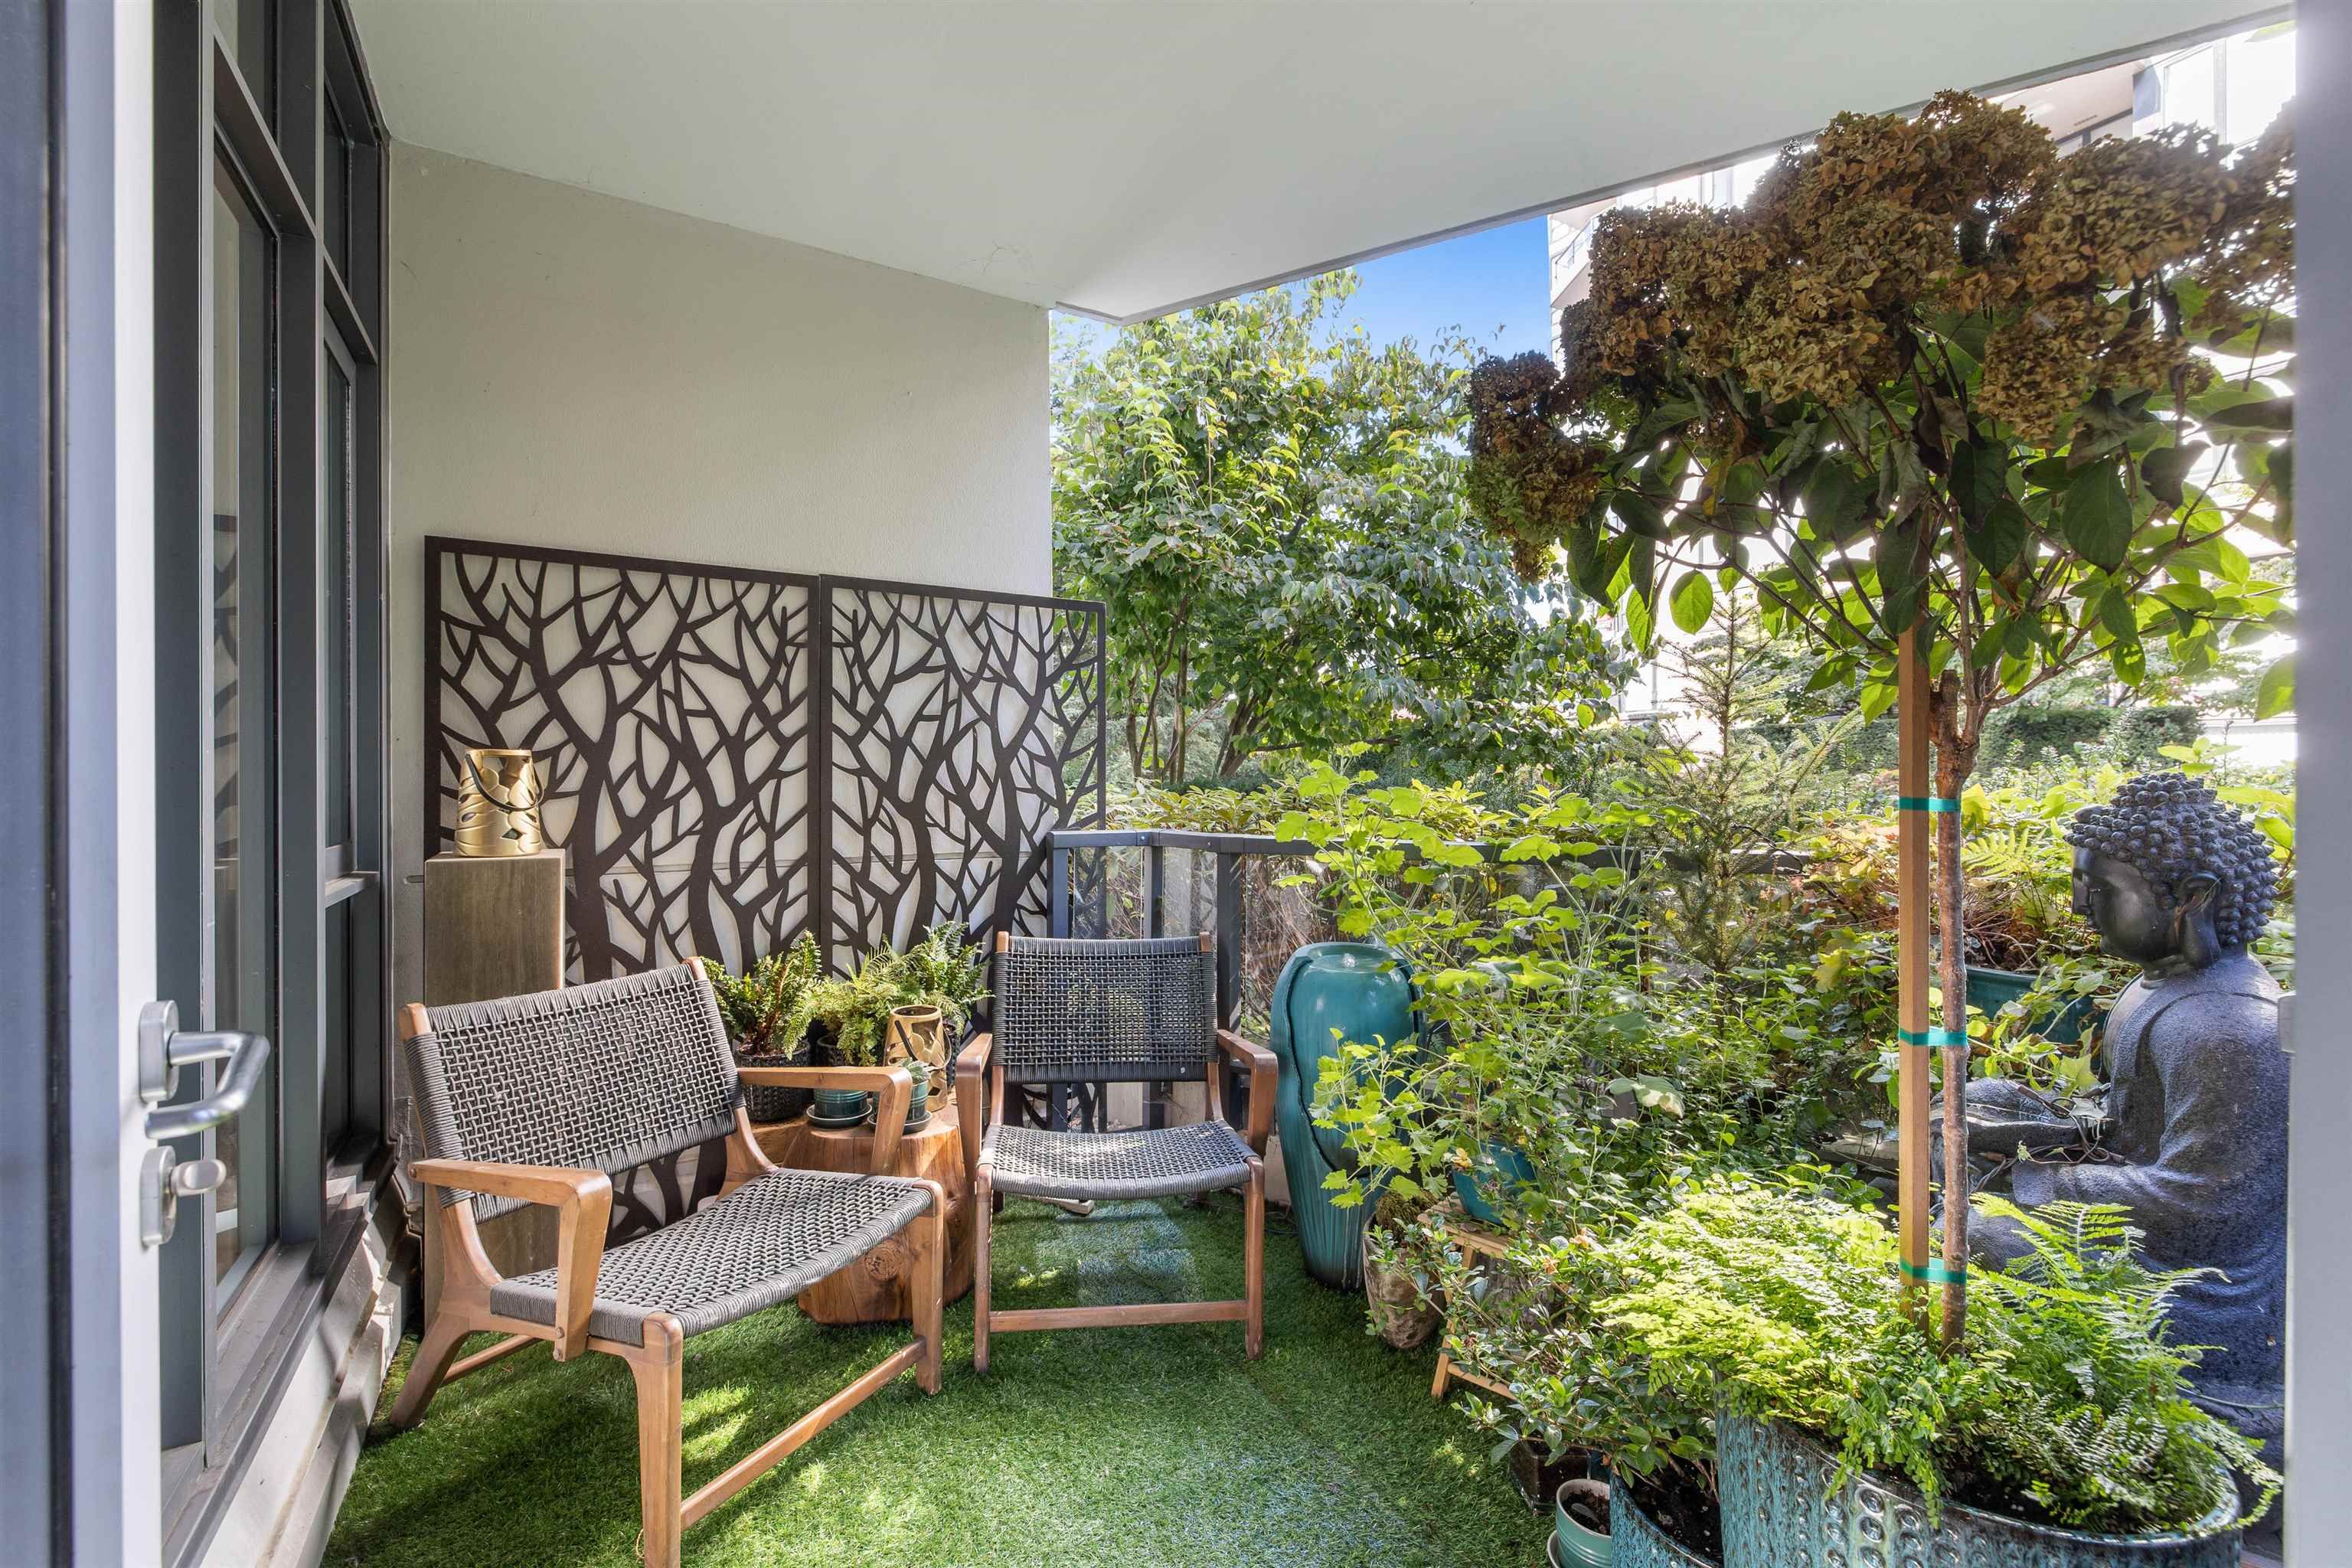 Enjoy the tranquil West facing patio, beautifully landscaped for privacy!